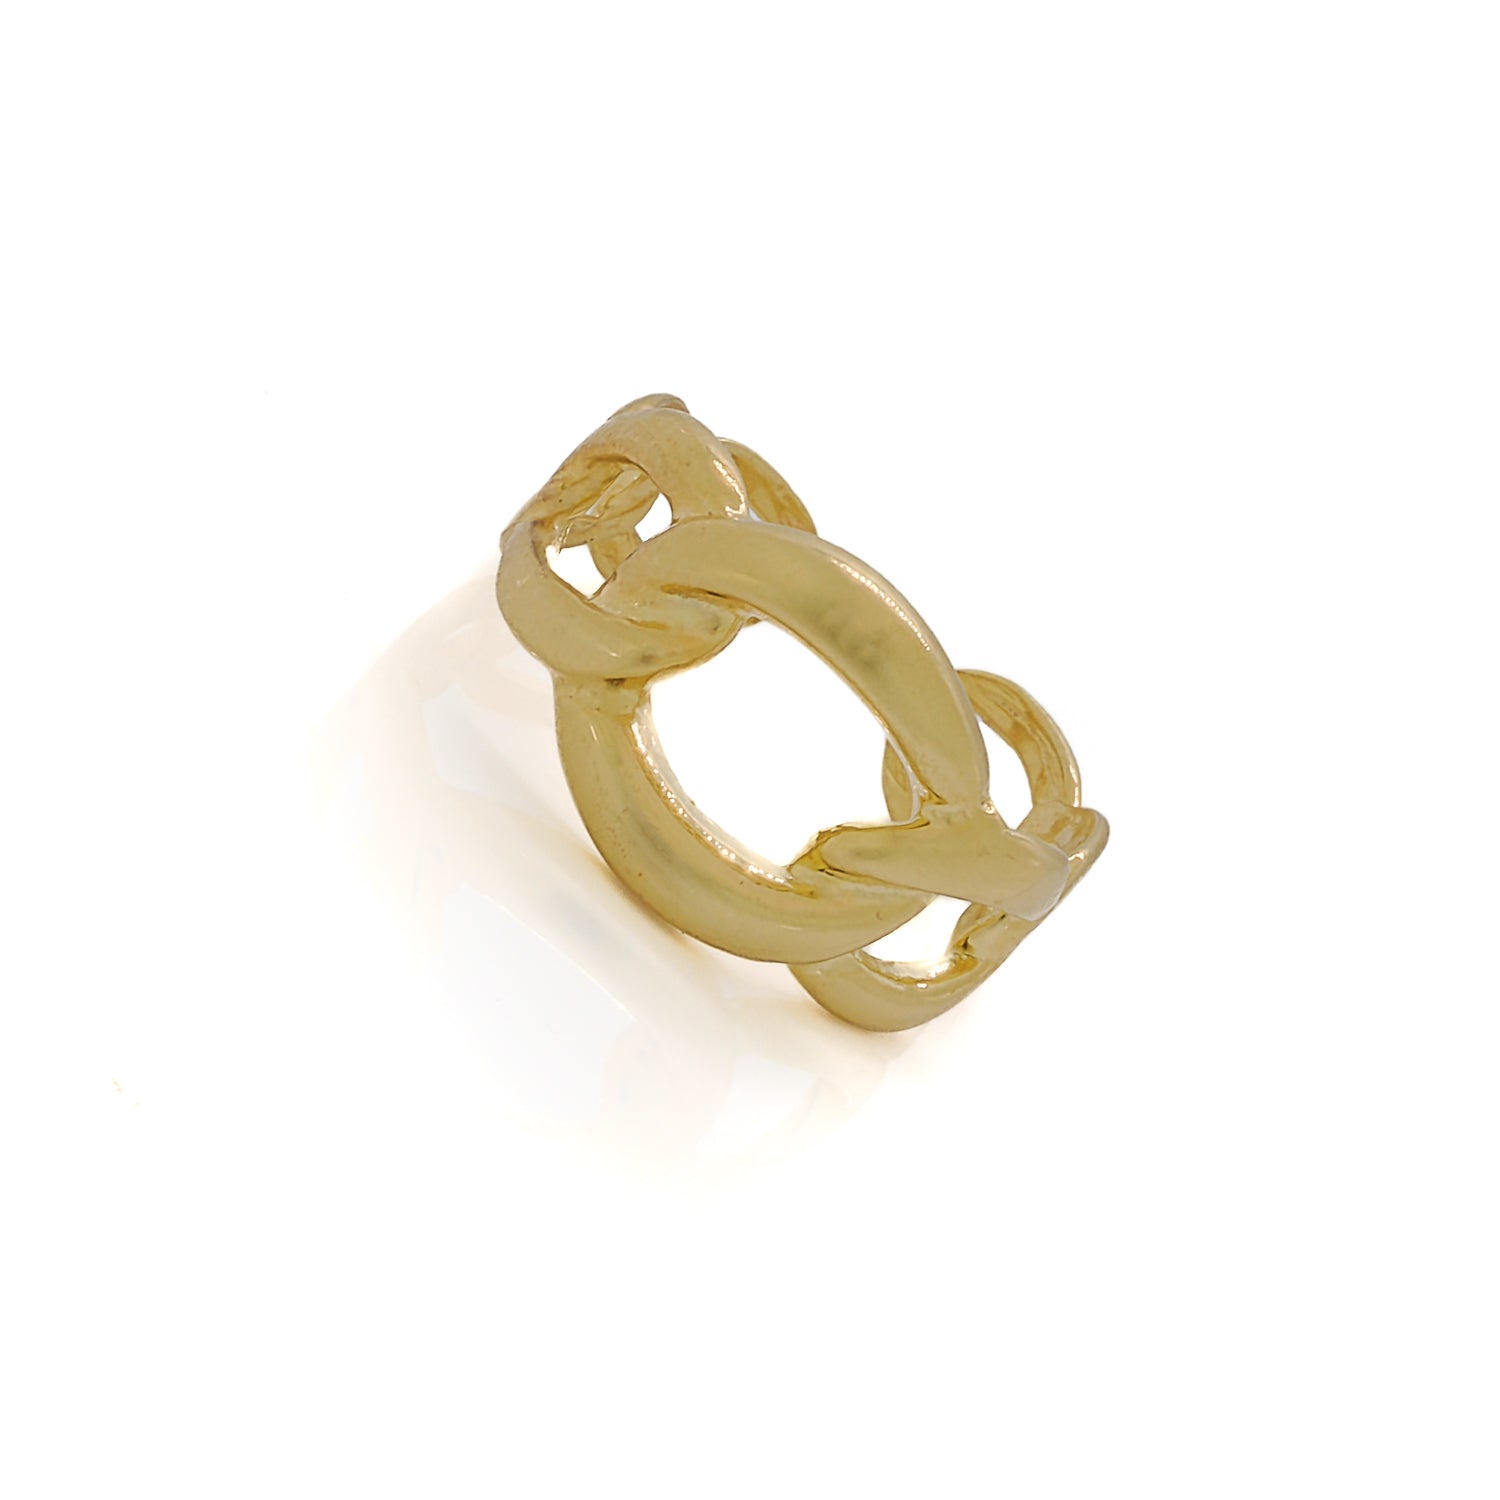 Handcrafted Mira Gold Ring - Classic Materials, Contemporary Flair